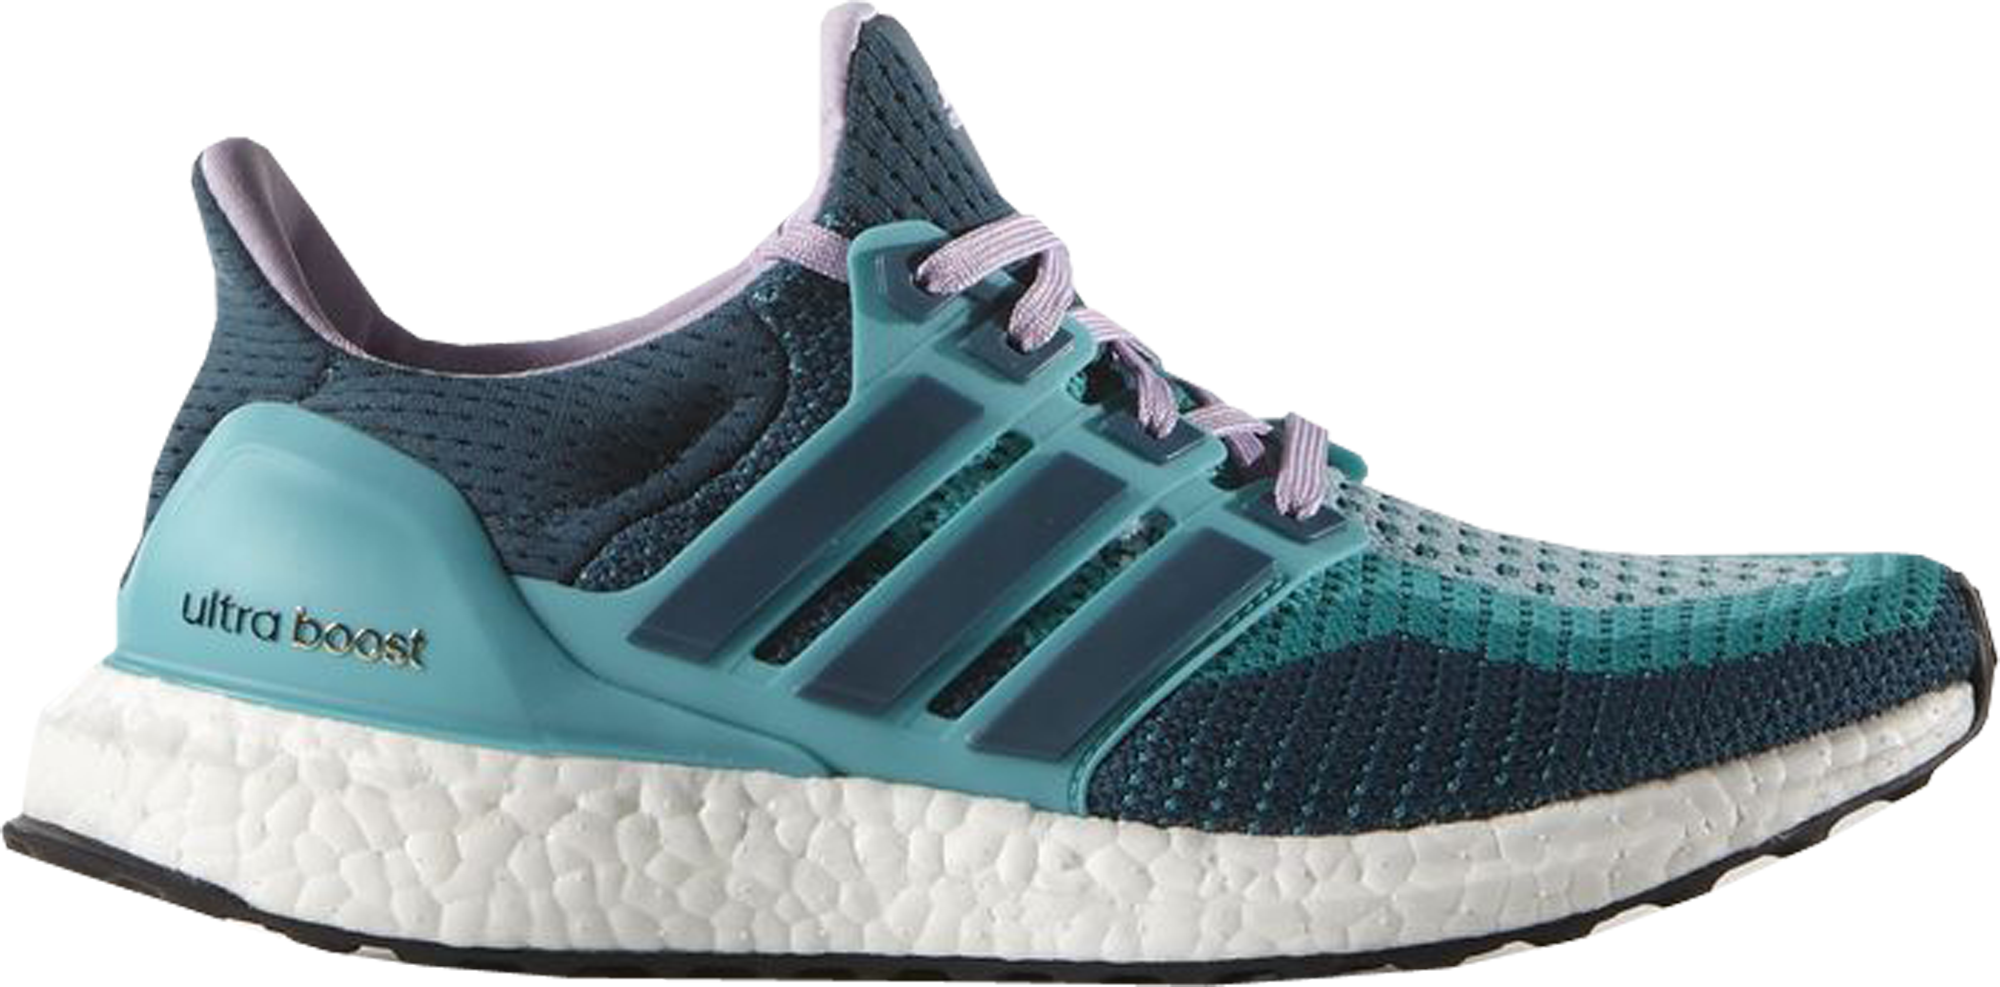 adidas ultra boost blue and green